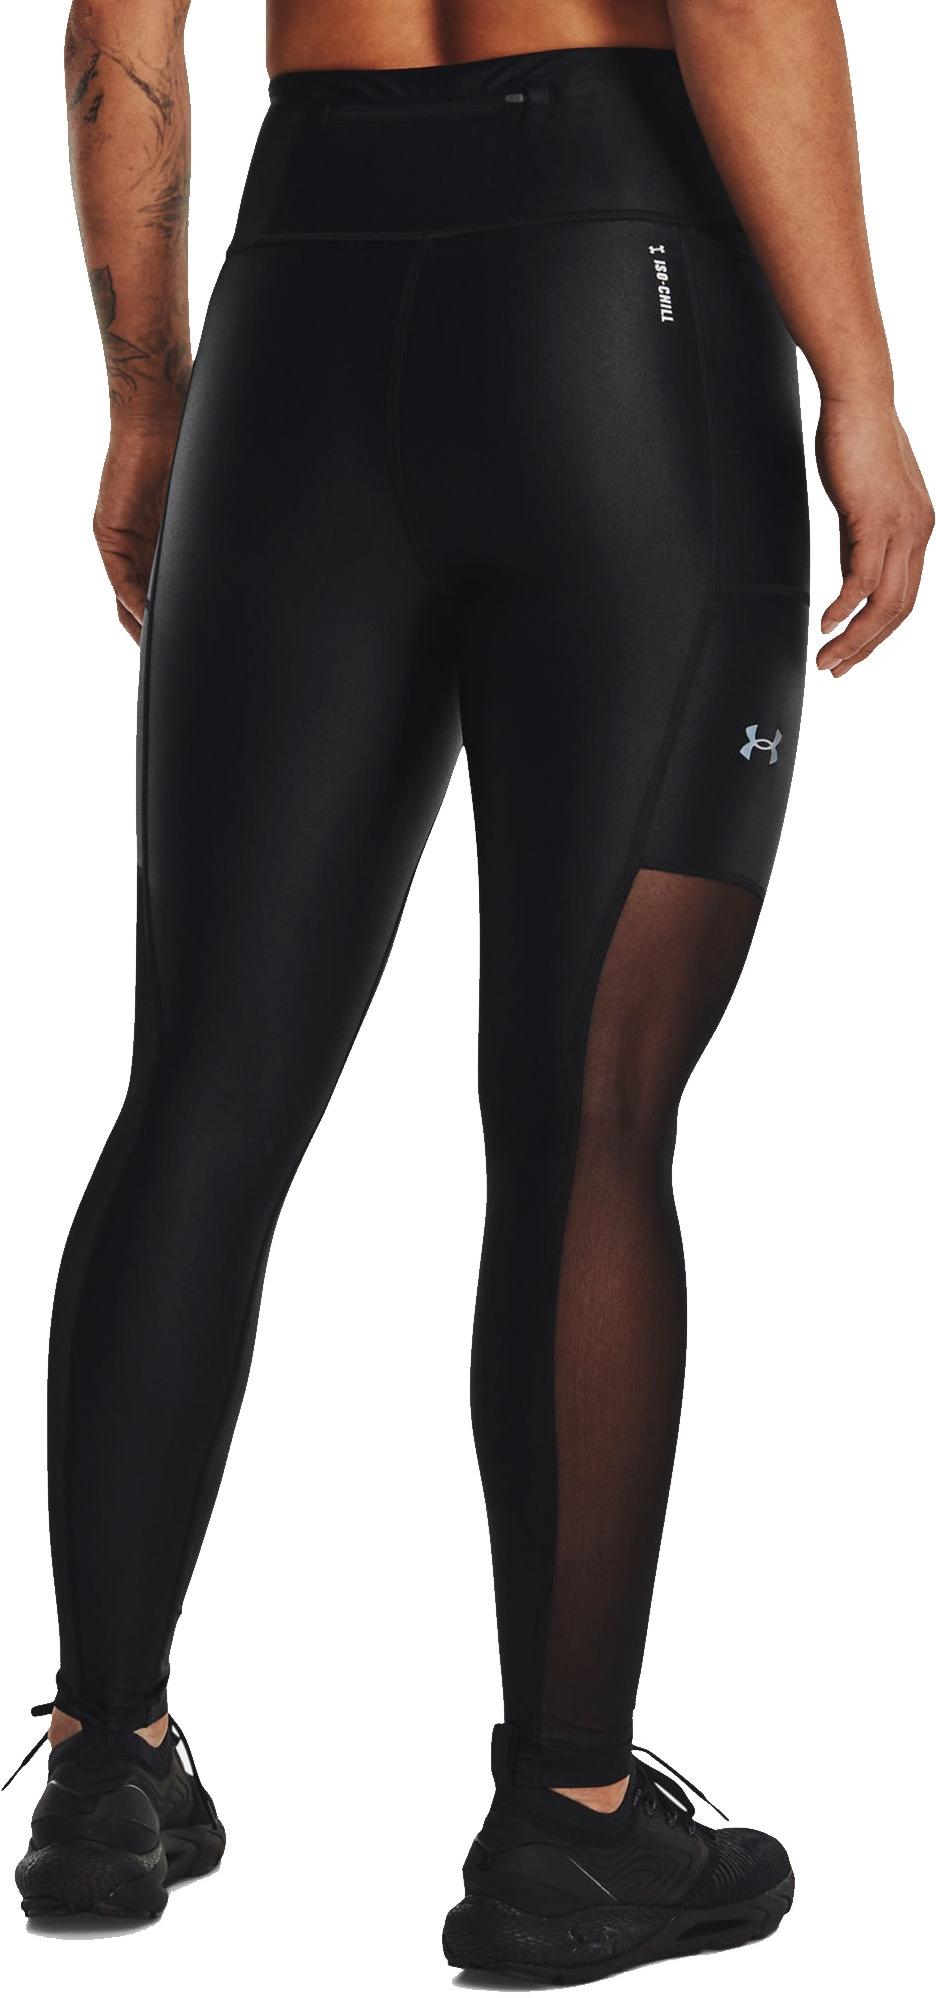 UNDER ARMOUR SEAMLESS WAVE SS 1351450-001 Black